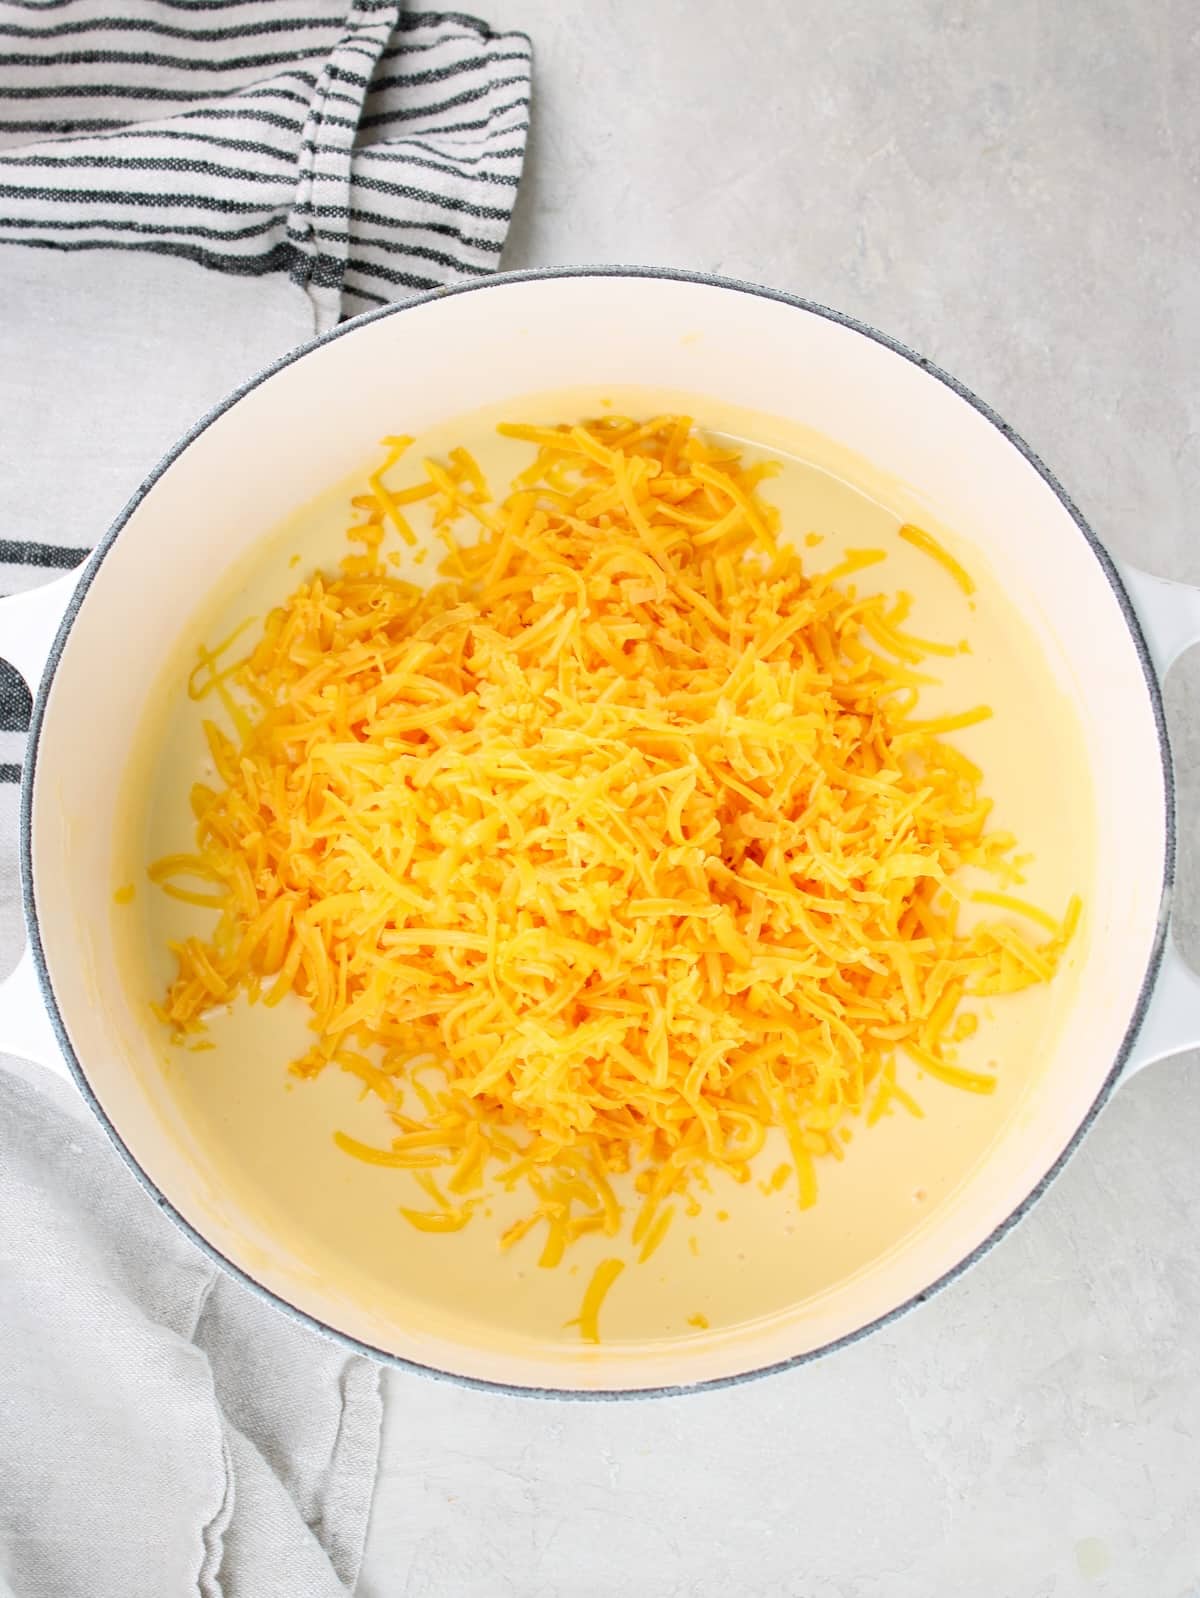 Shredded cheddar cheese added to the pot of ingredients.